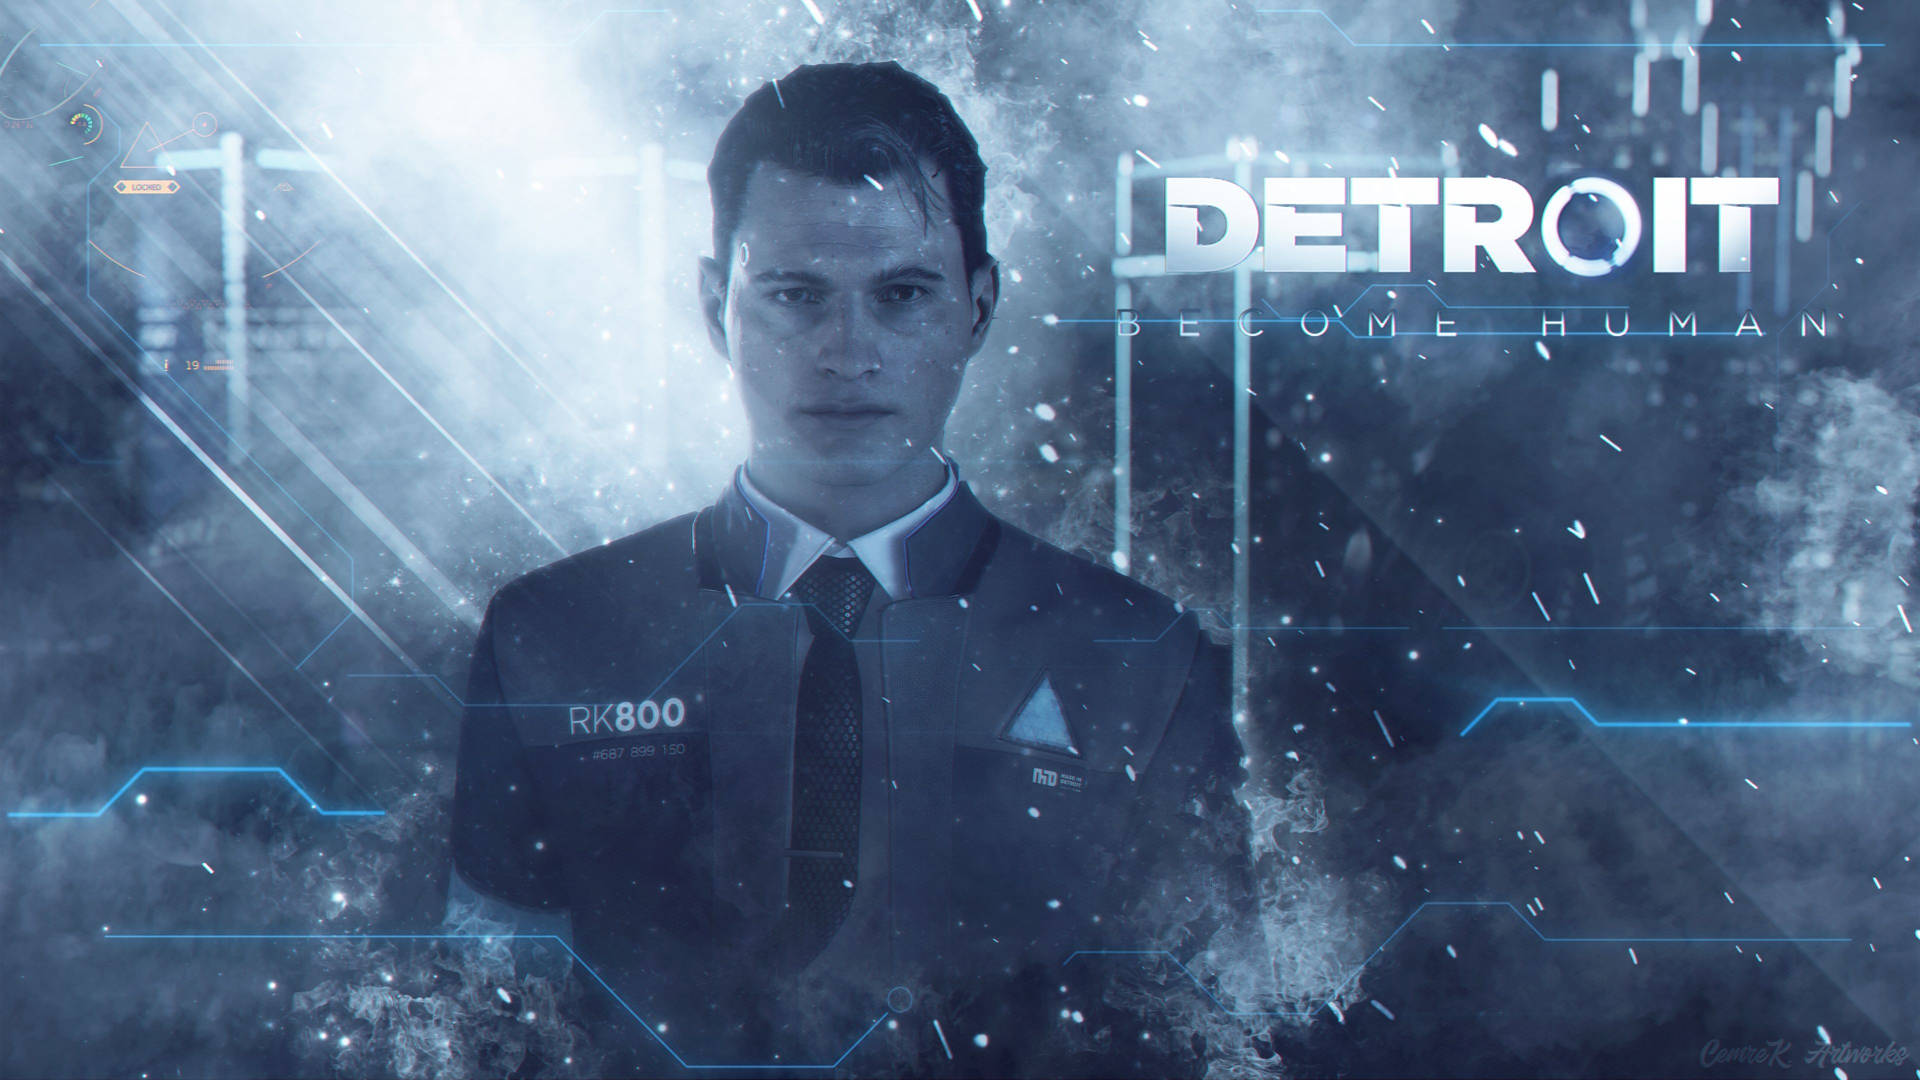 Detroit Become Human Wallpapers